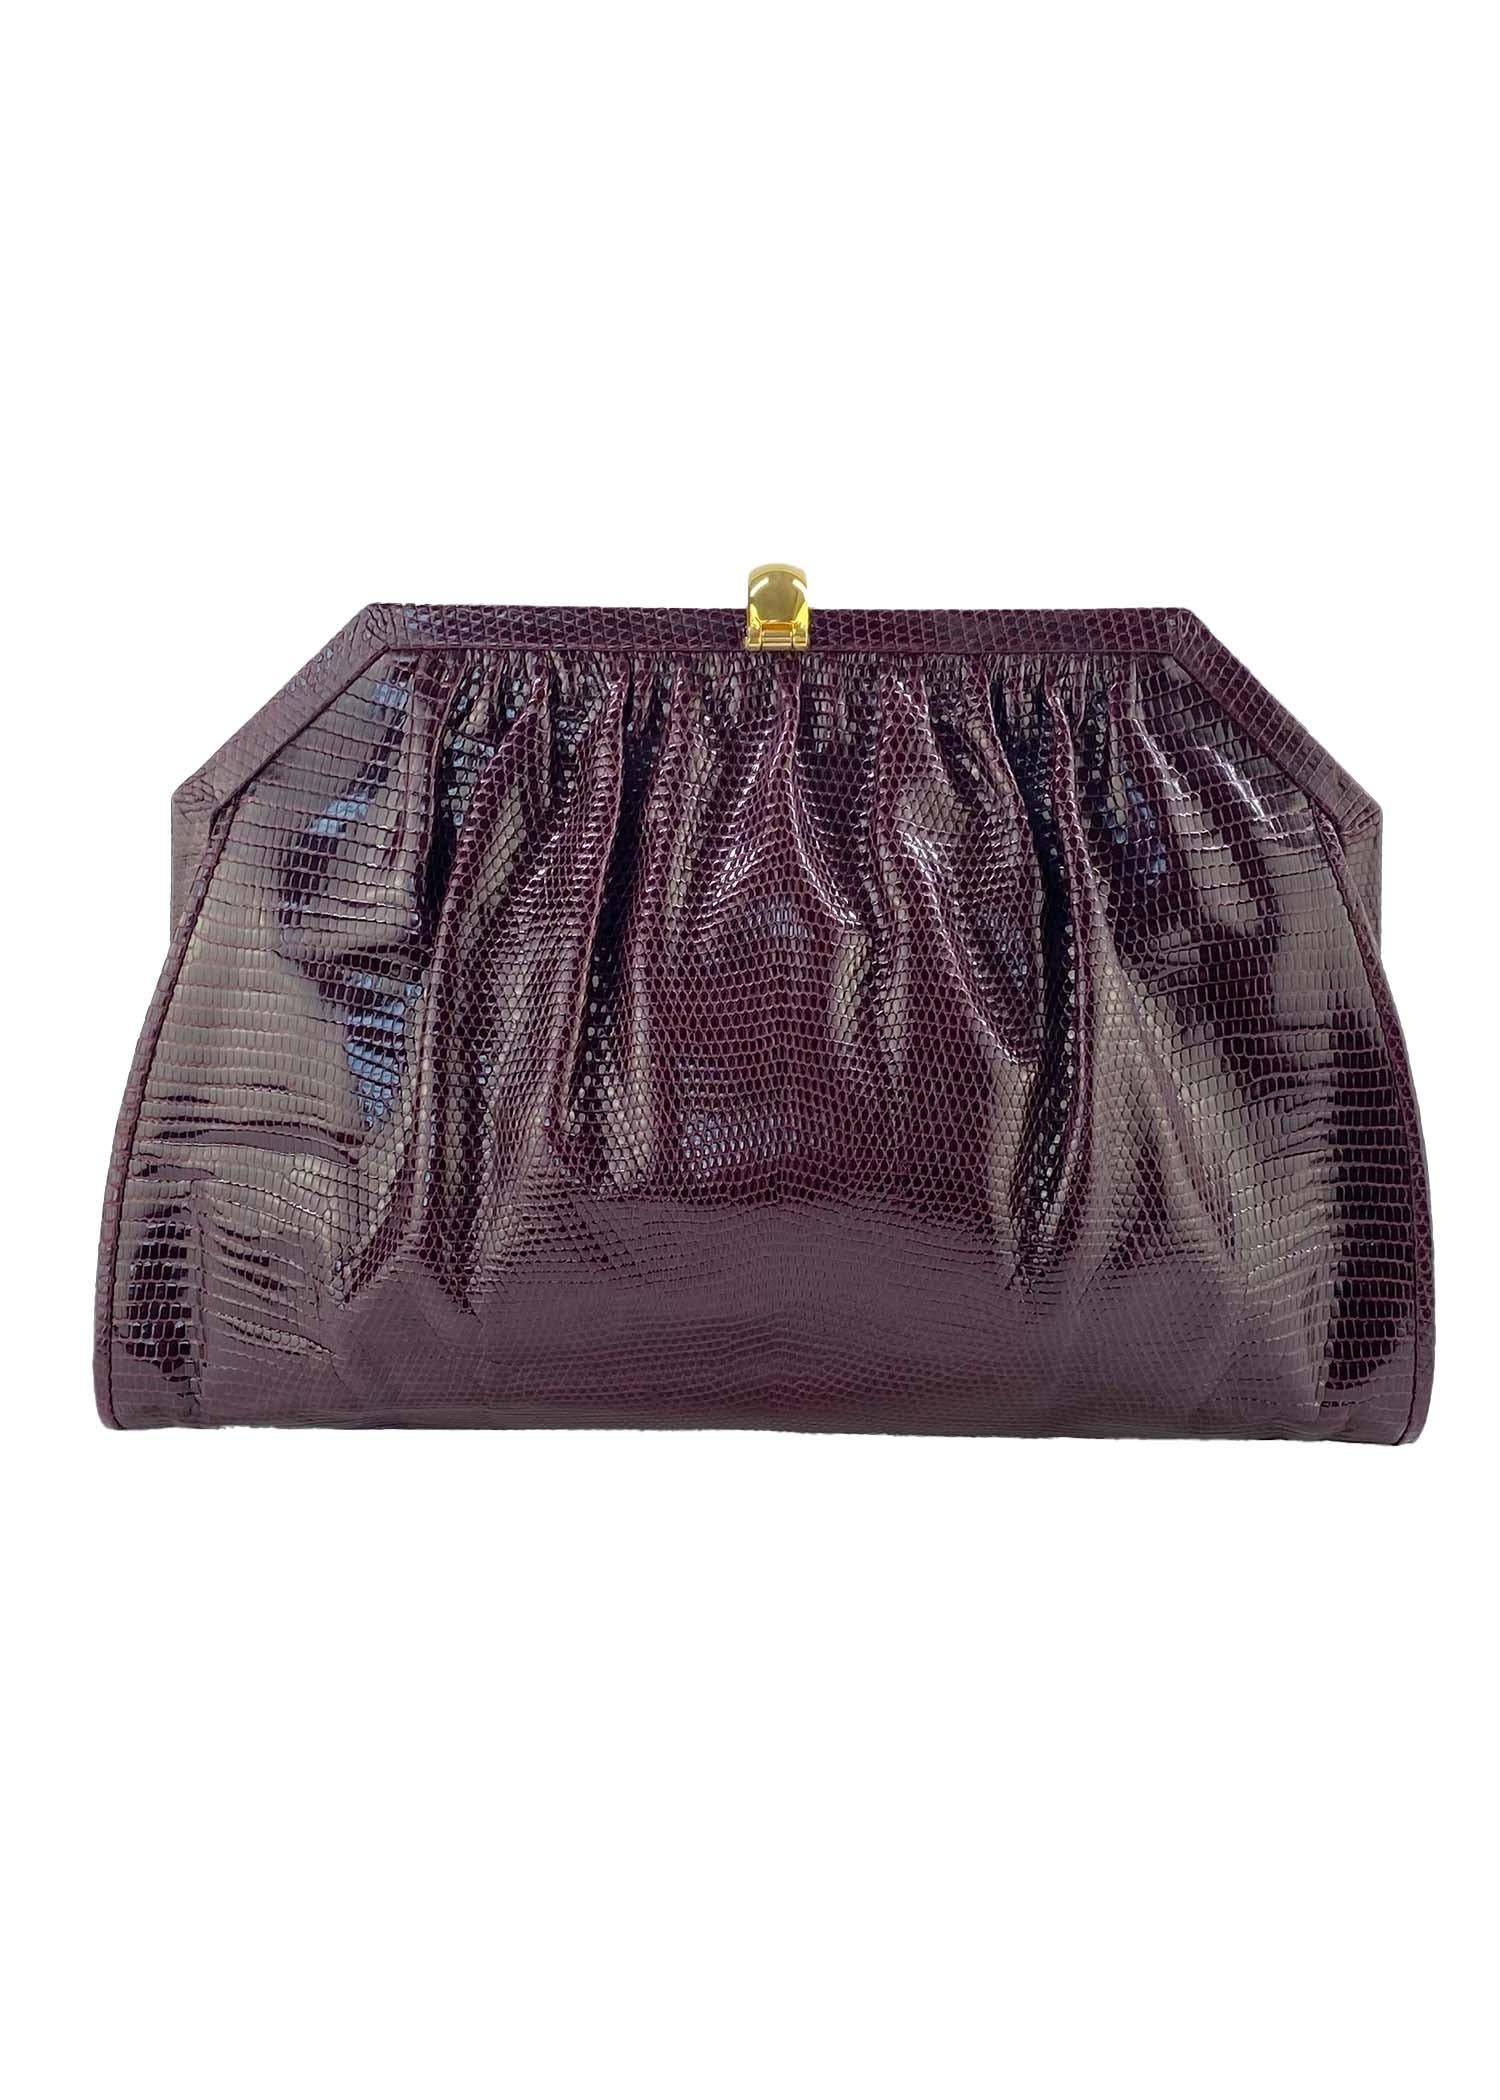 S/S 1987 Gucci Burgundy Lizard Chain Crossbody Clutch In Excellent Condition In West Hollywood, CA